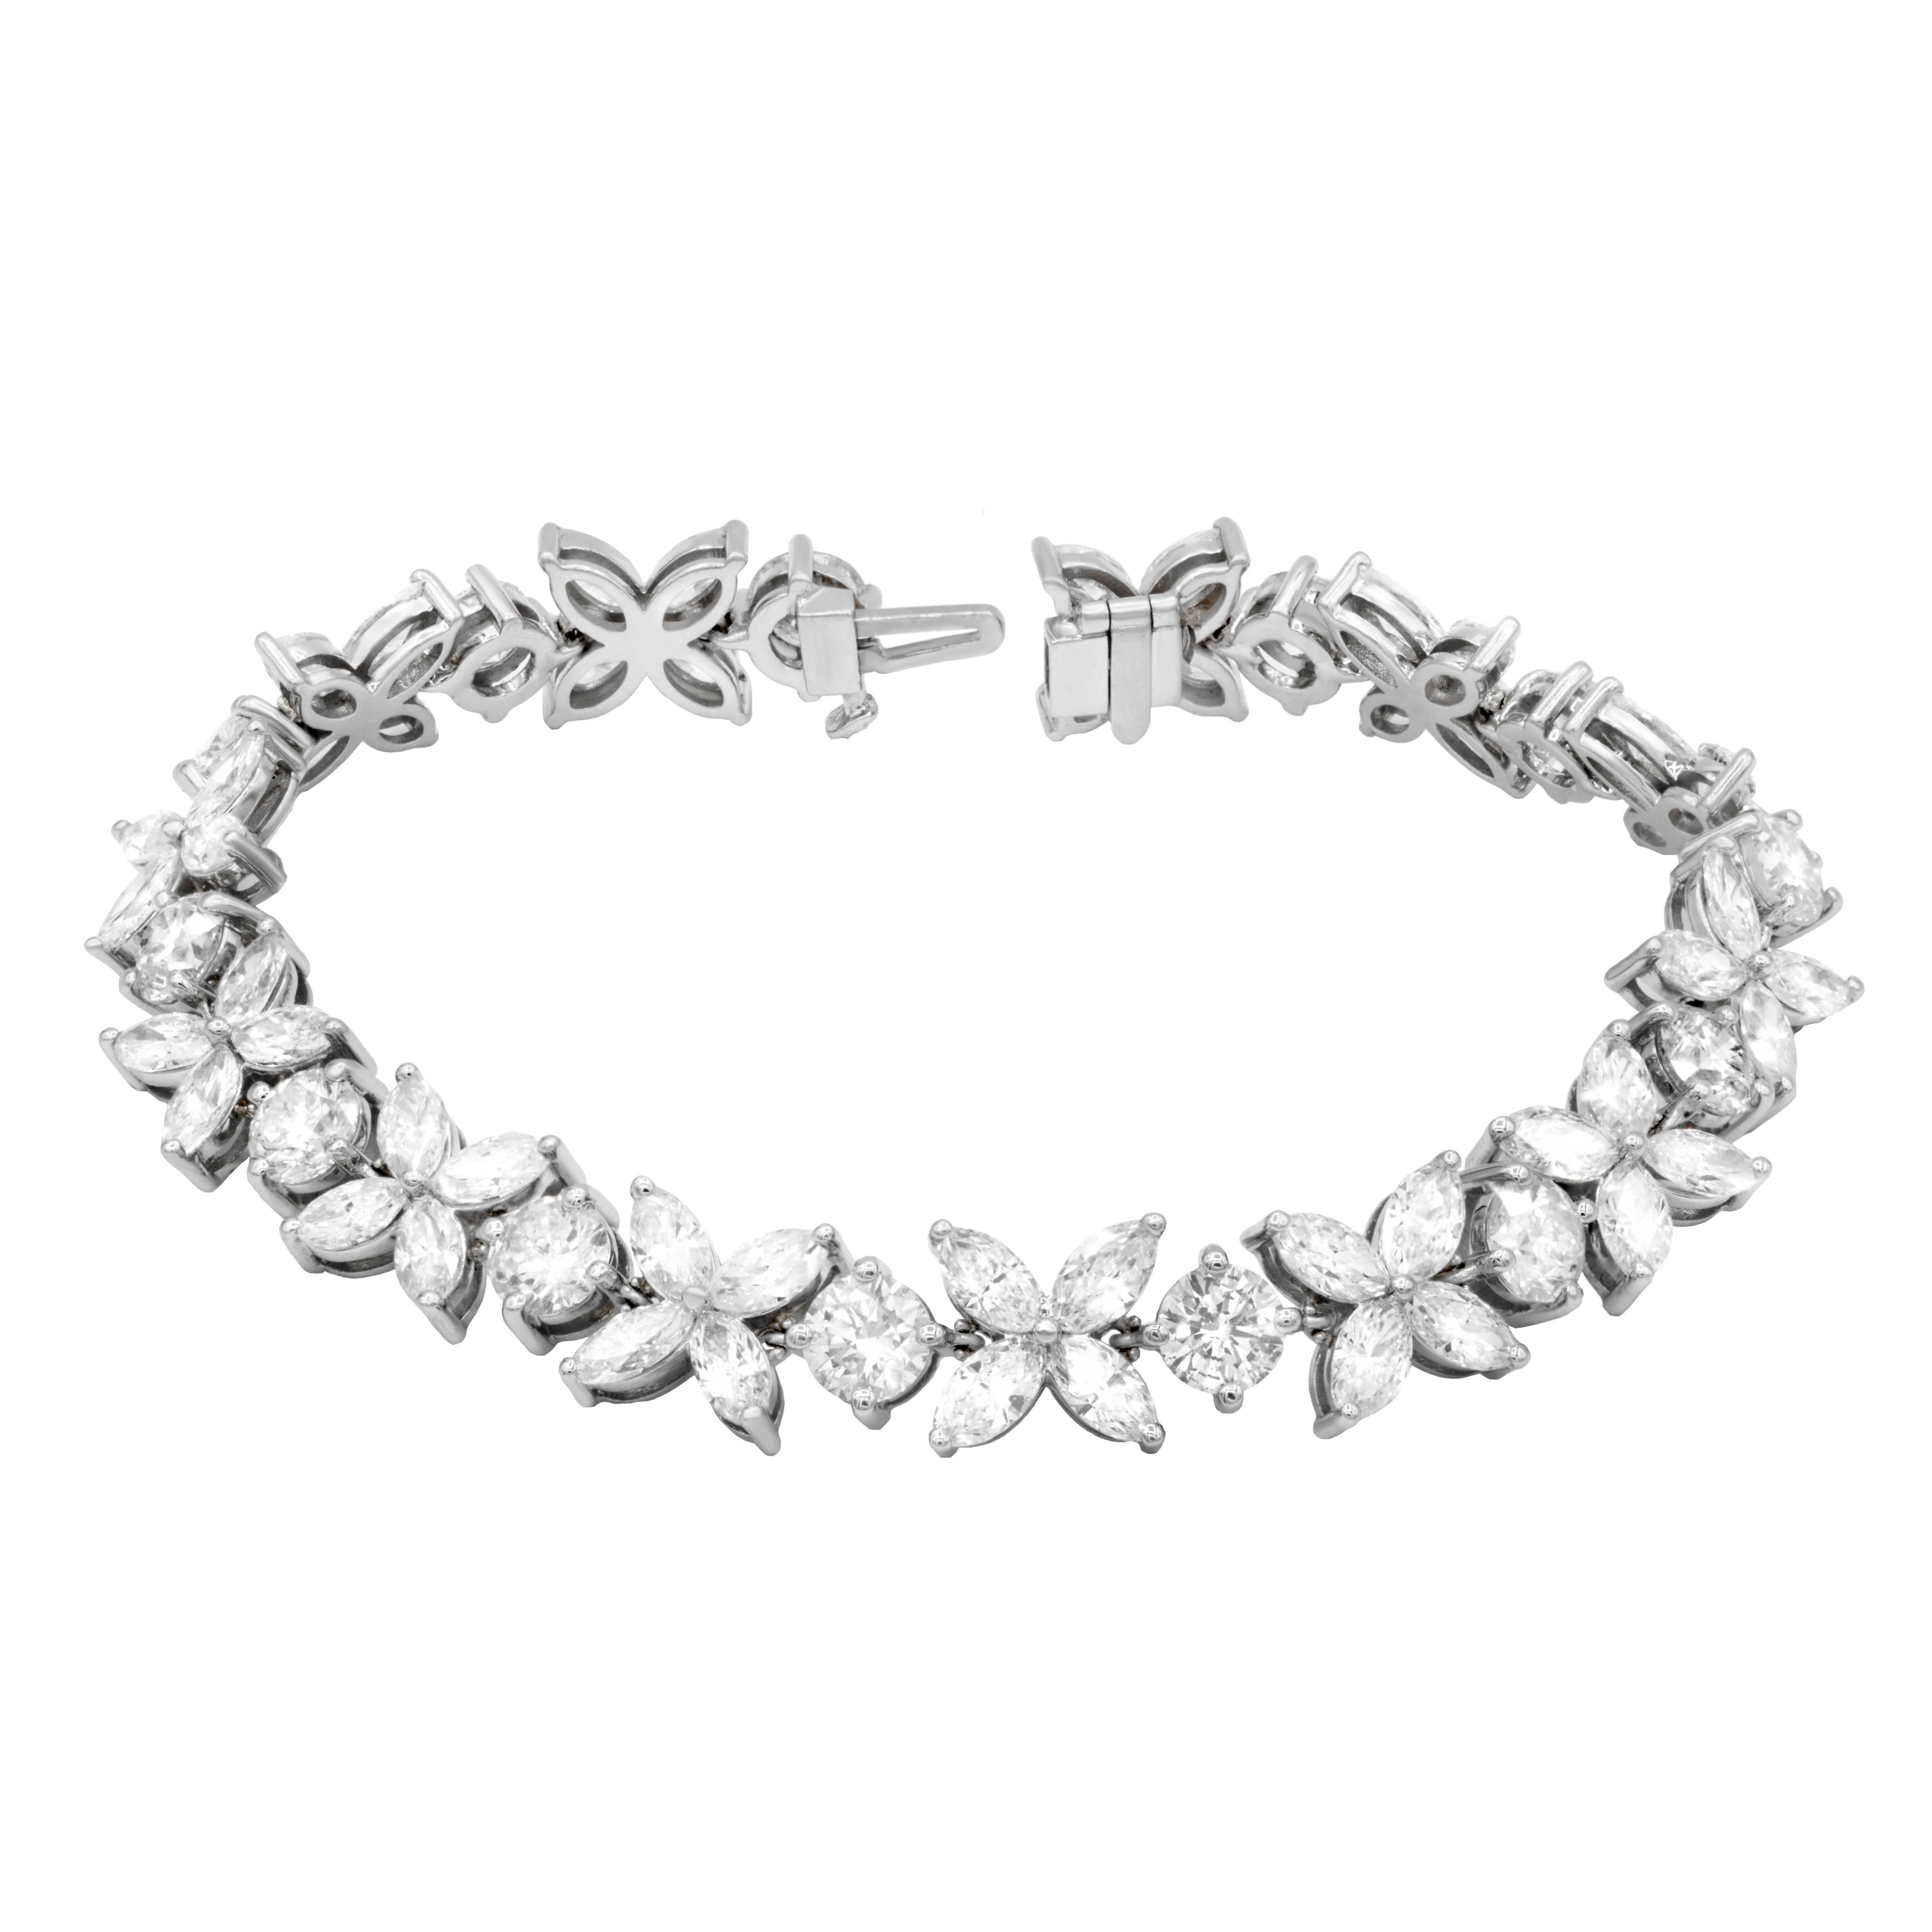 18K White Gold Cluster diamond bracelet with marquise and round diamonds. Features 20.02 Carats of marquise shape and round shape diamonds. Custom made 18K white gold mounting. 
Comes with certificate of appraisal.
